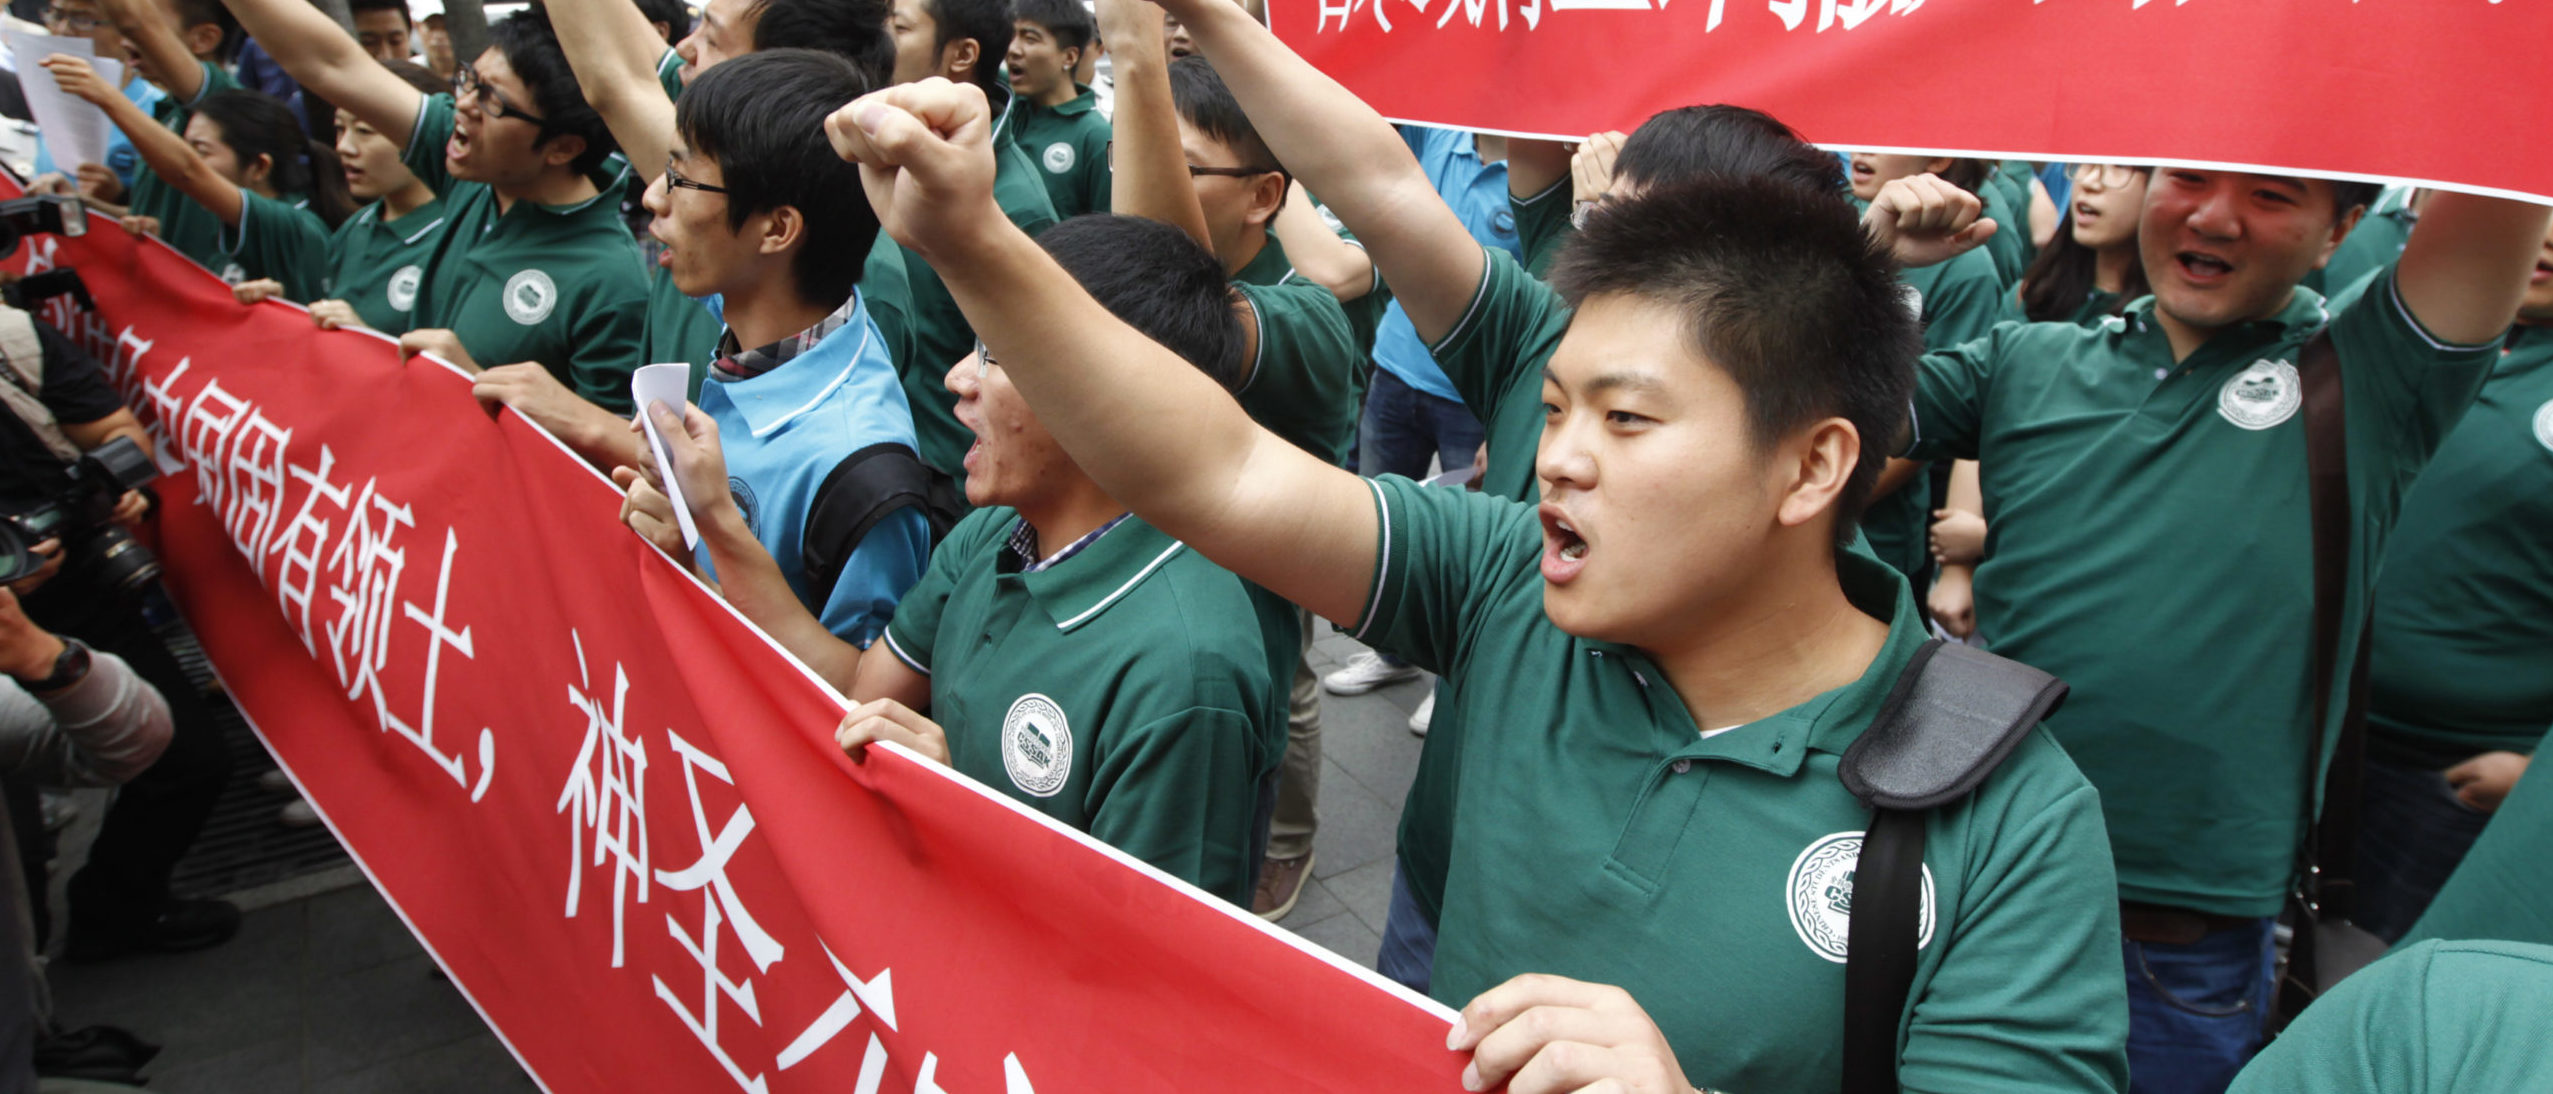 Members of the Chinese Students and Scholars Association in Korea chant slogans denouncing Japan during an anti-Japan protest near the Japanese embassy in Seoul September 20, 2012. (REUTERS/Lee Jae-Won)